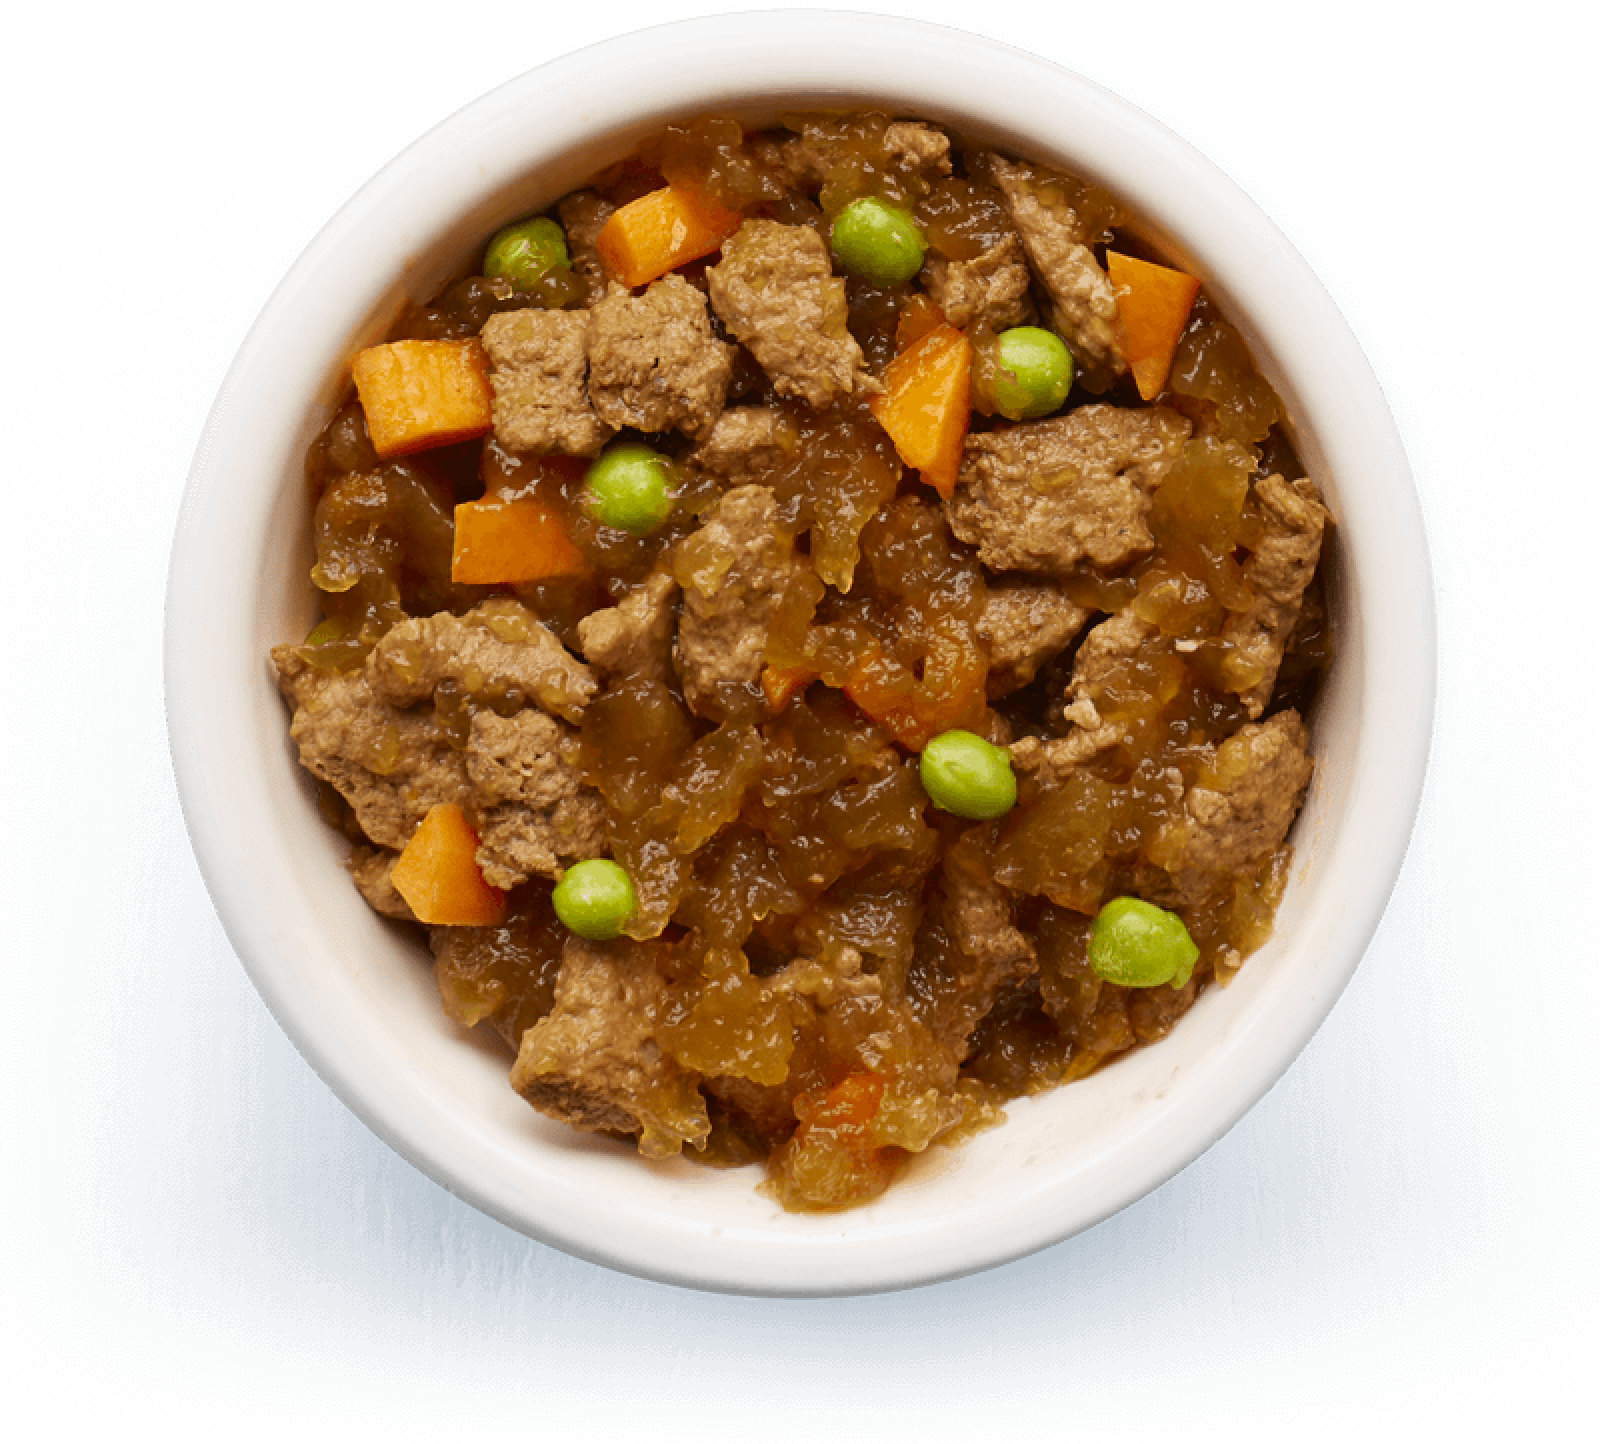 An image of Tails wet food. Braised fillets of beef with vegetables in tasty jelly.